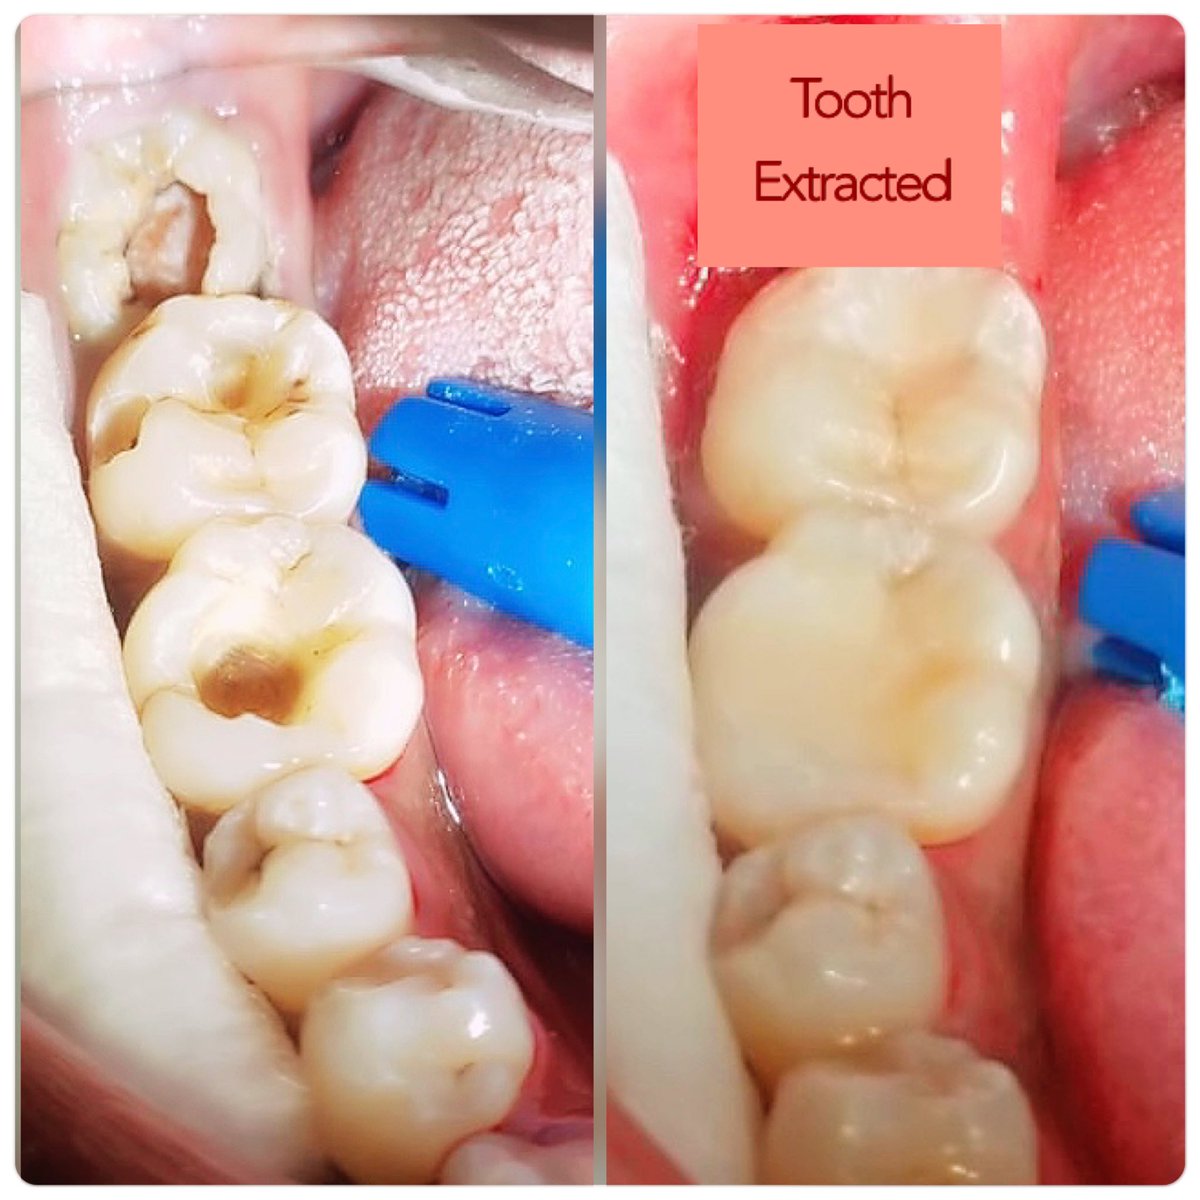 Cavities, gum issues, missing teeth? What's making you chew using only one side😰@Arrow_Dental ✔️TSC and Disciplined Forces schemes accepted at Thika branch. Southern Bypass Samidoh Kanjo Peter Tosh Jadon Sancho Reece James NHIF Nairobi Thiago Juja Dasani Ezra Chiloba Kanjo